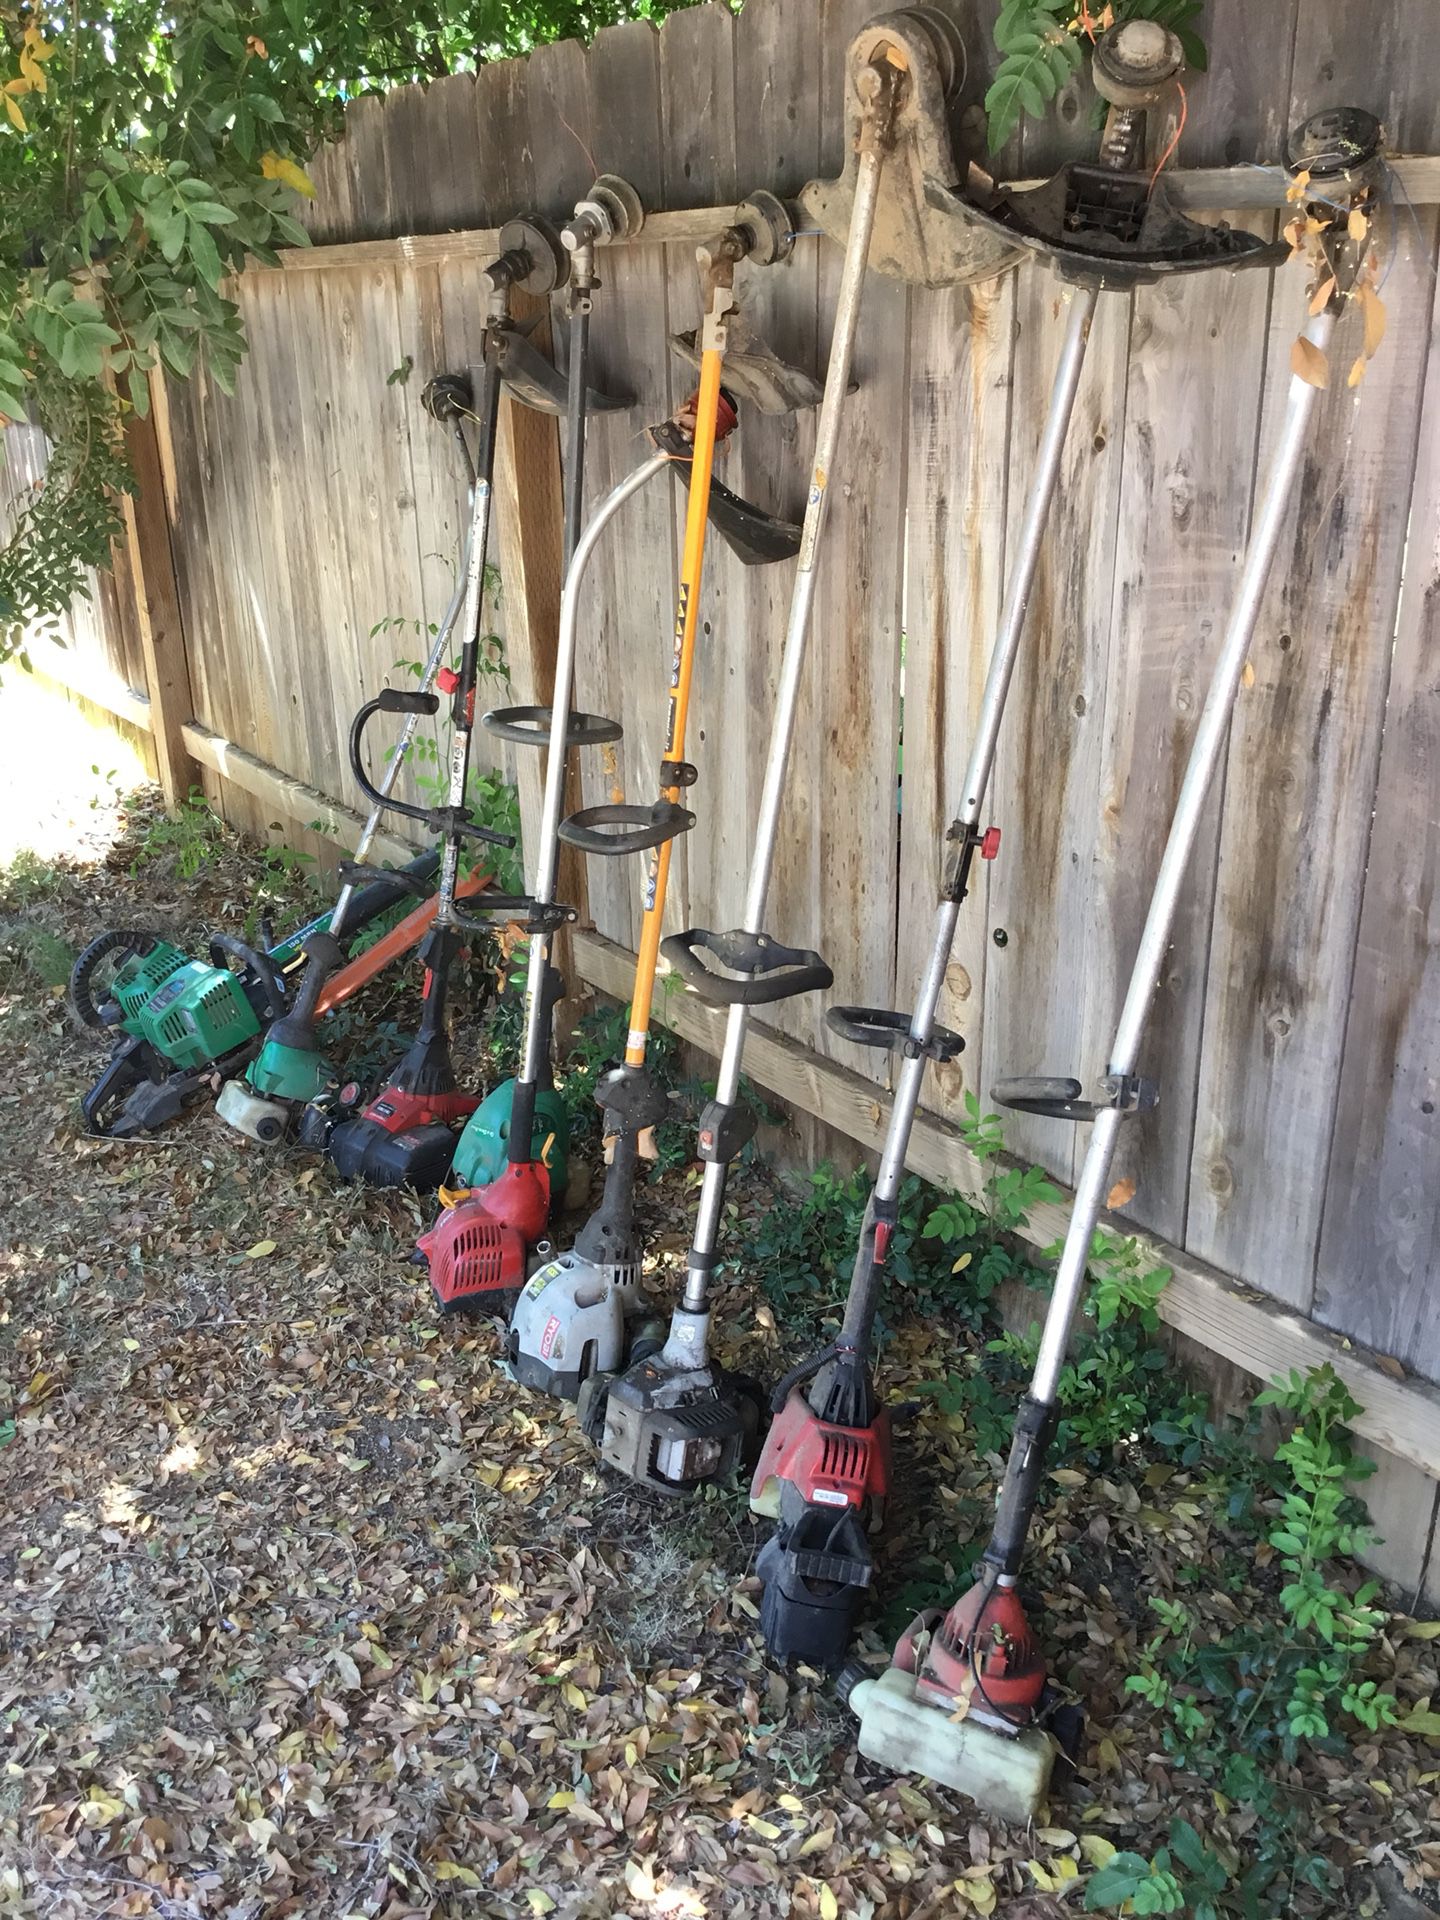 8 grass trimmers + 1 leaf blower